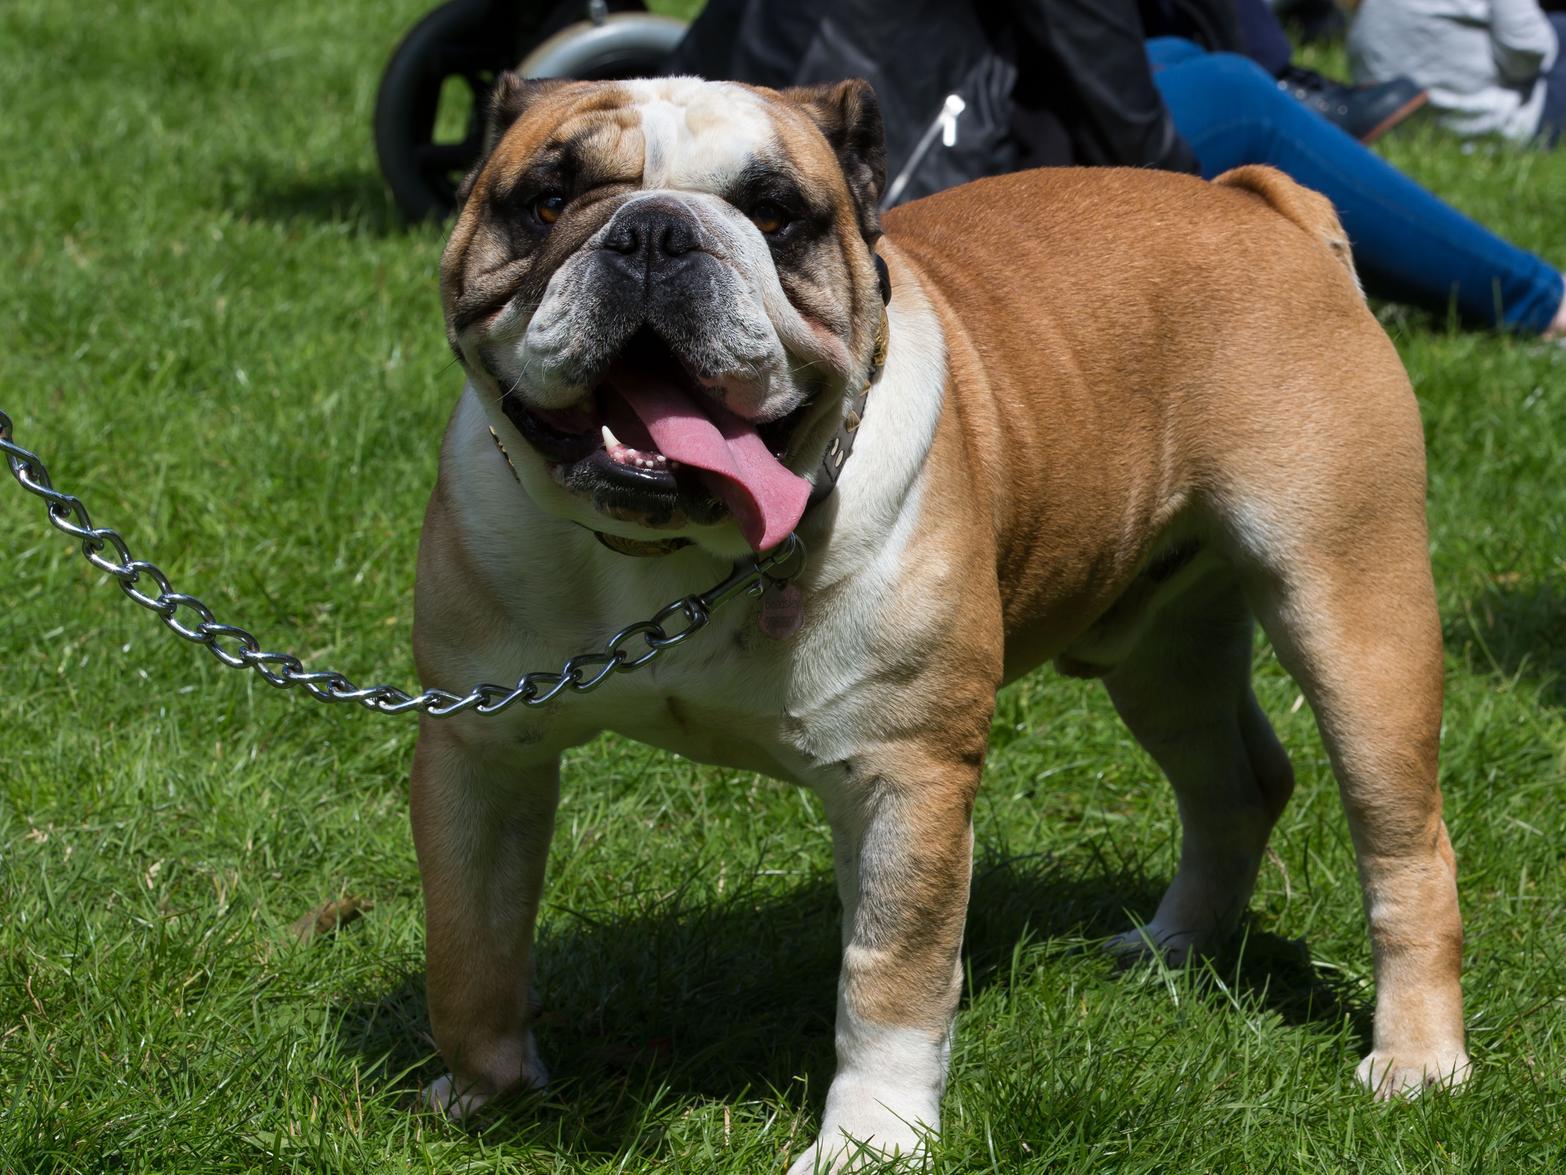 Four English Bulldogs were stolen in 2019, according to figures.